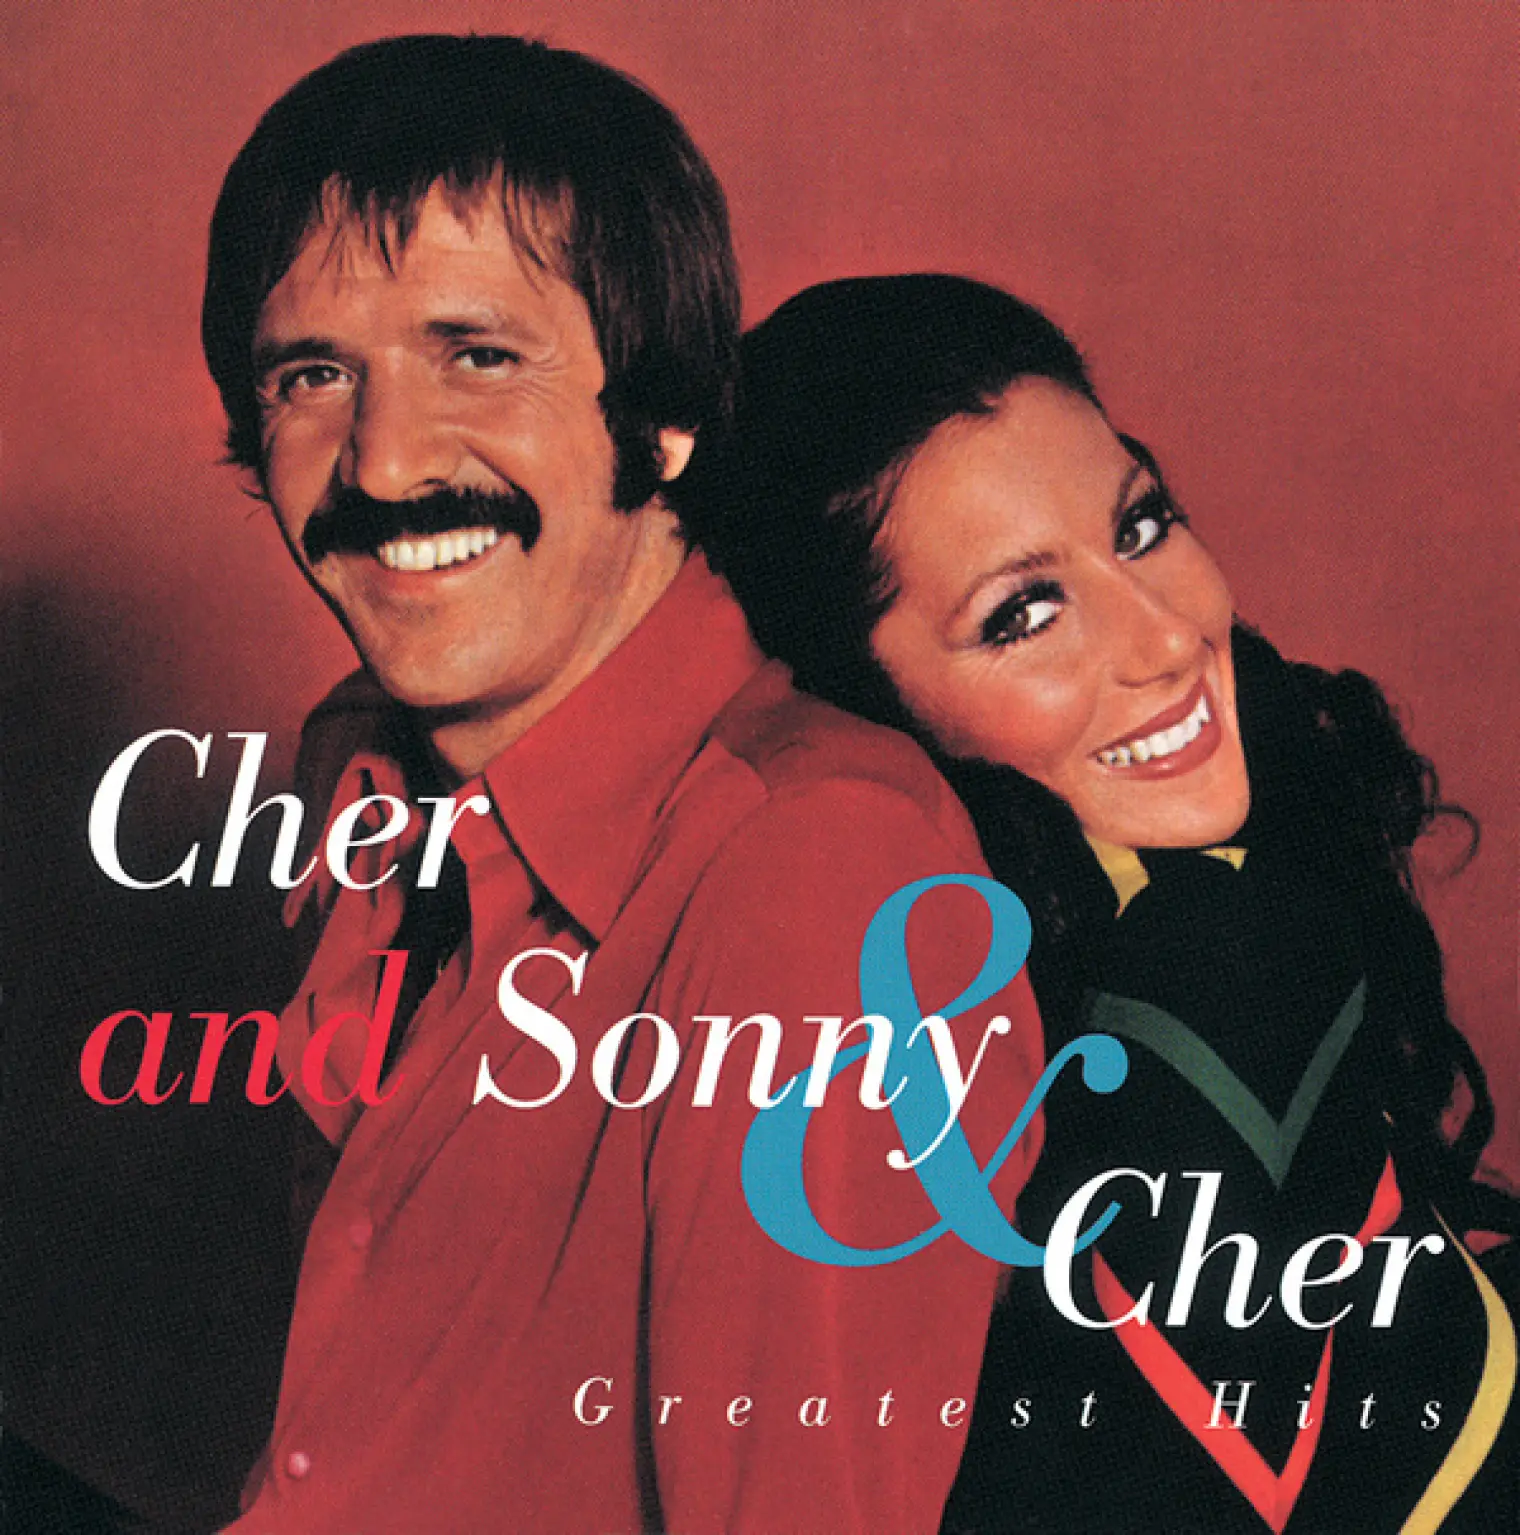 Cher and Sonny & Cher Greatest Hits -  Cher 